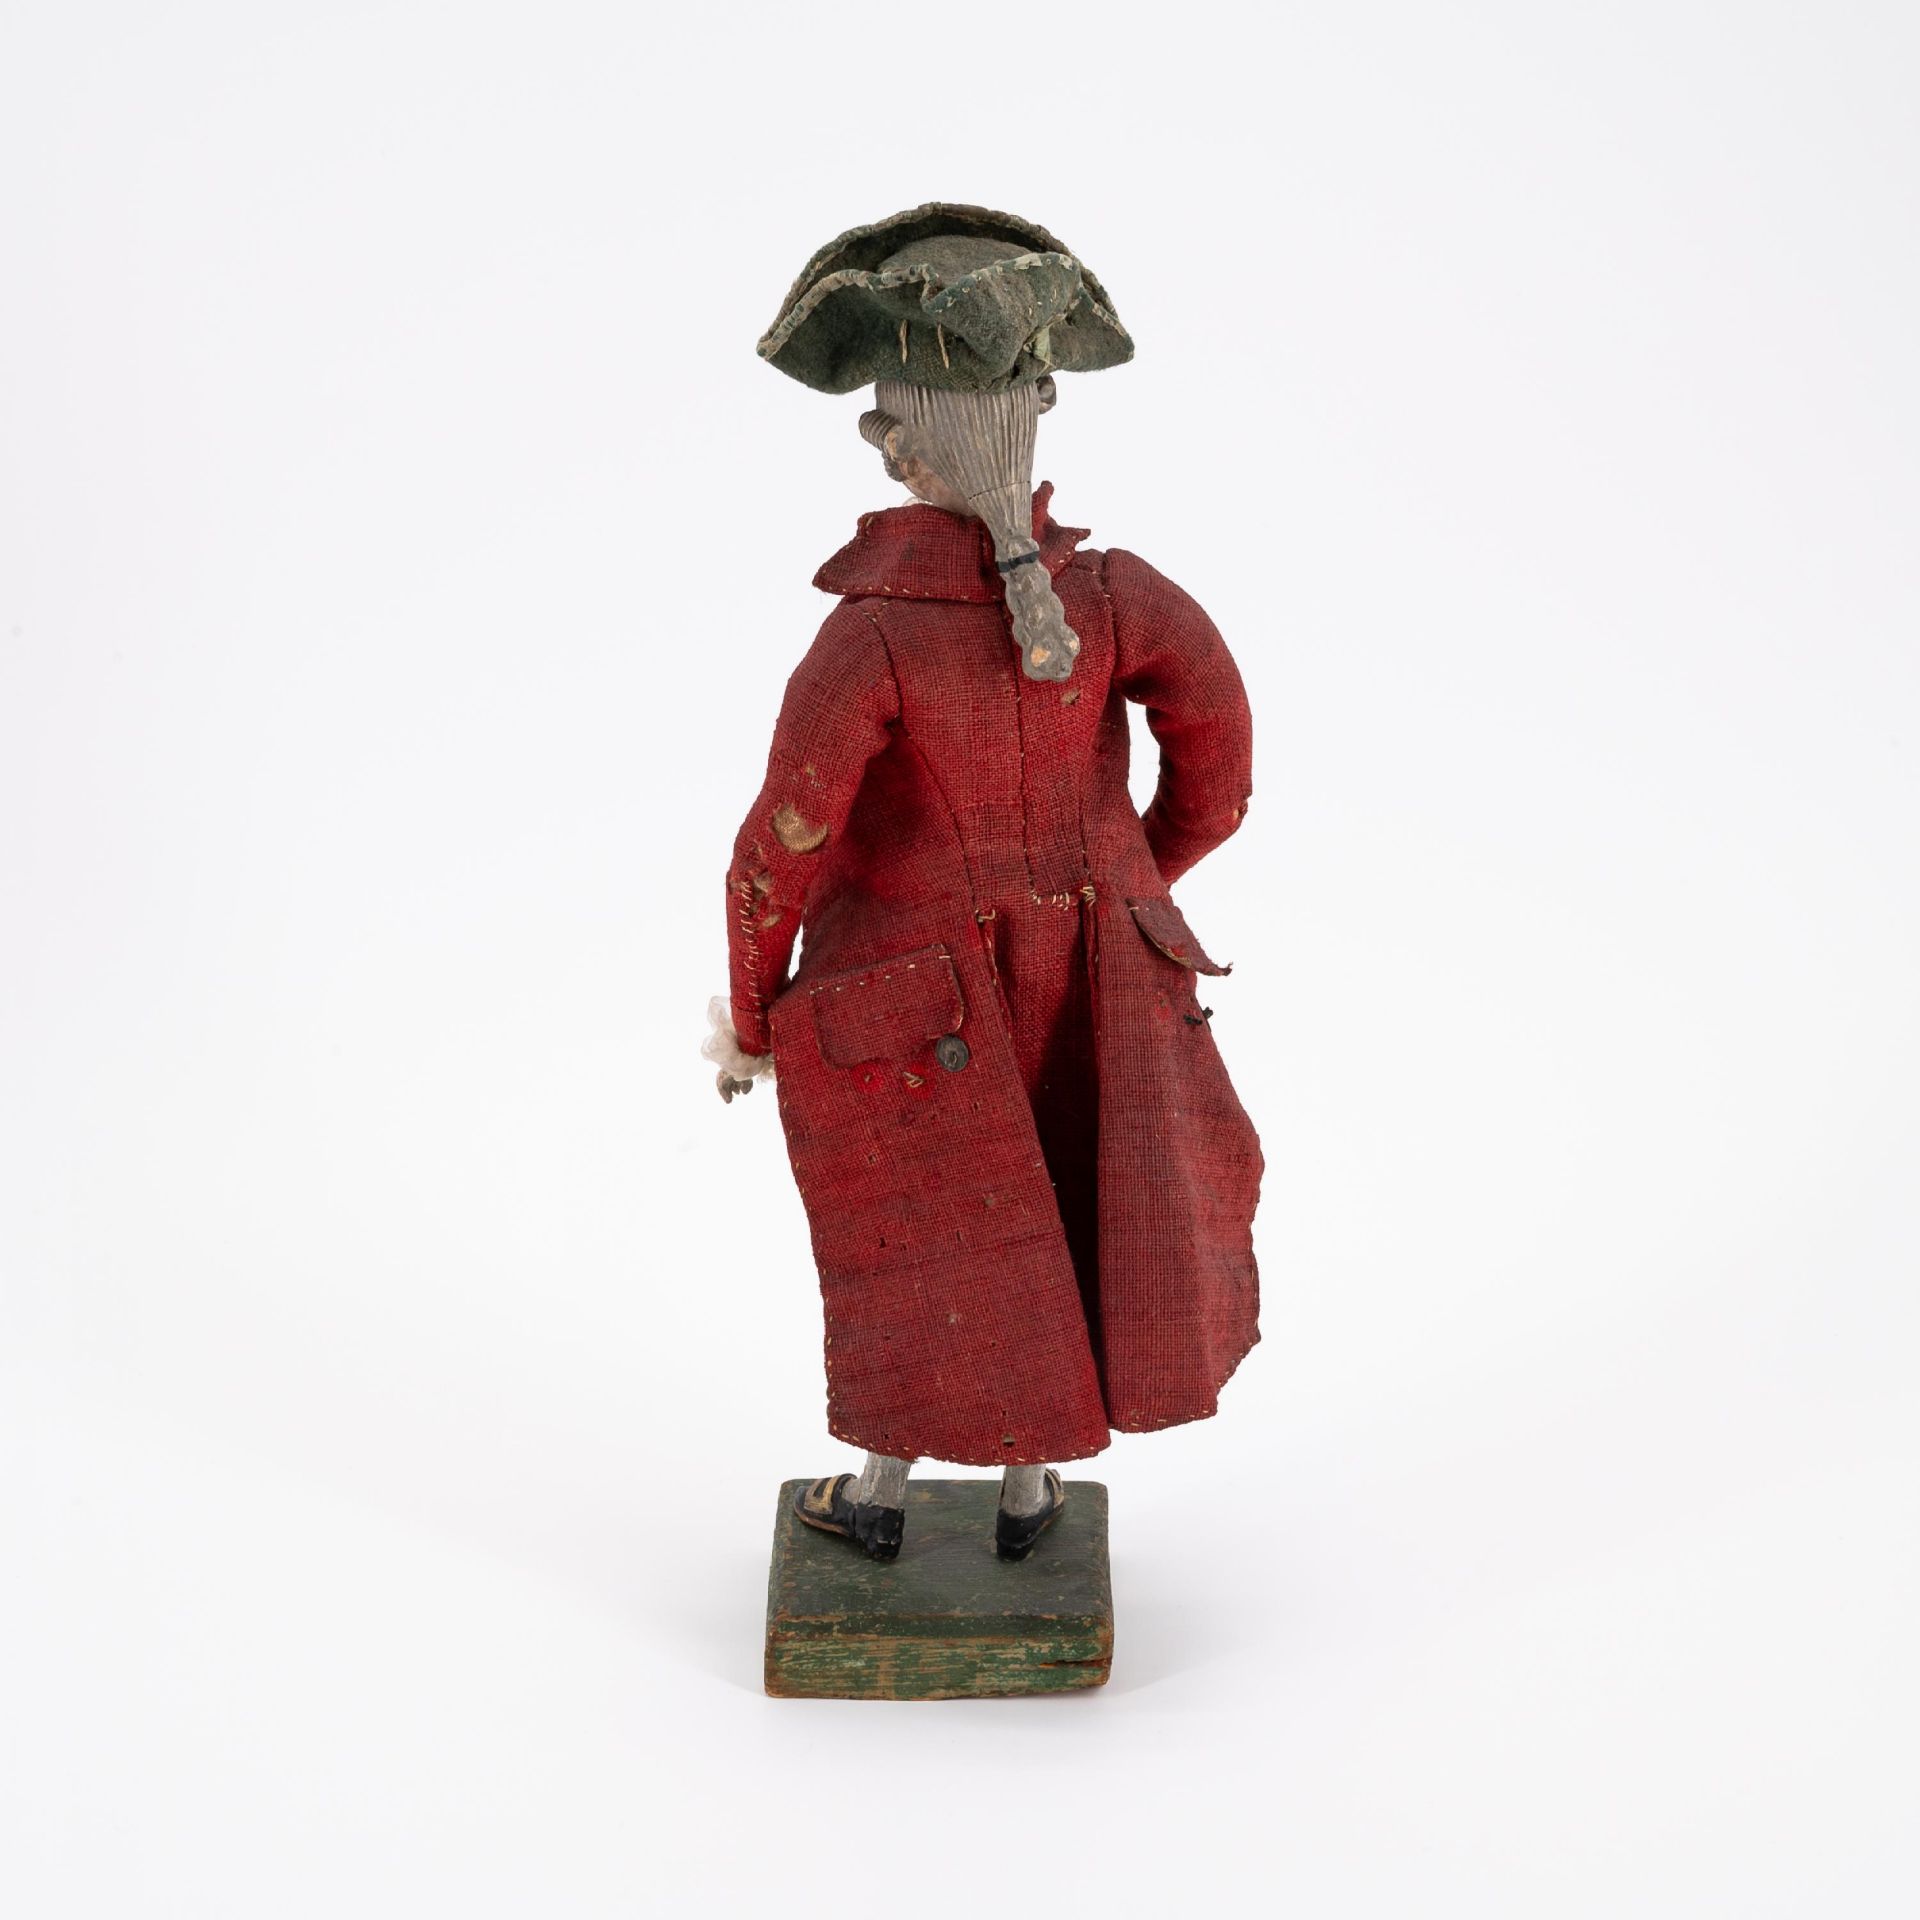 MODEL FIGURINE OF A GALLANT GENTLEMAN MADE OF WOOD, WOOL, VELVET, SILK, GOLDEN TRIMMINGS AND SILVER - Image 3 of 5